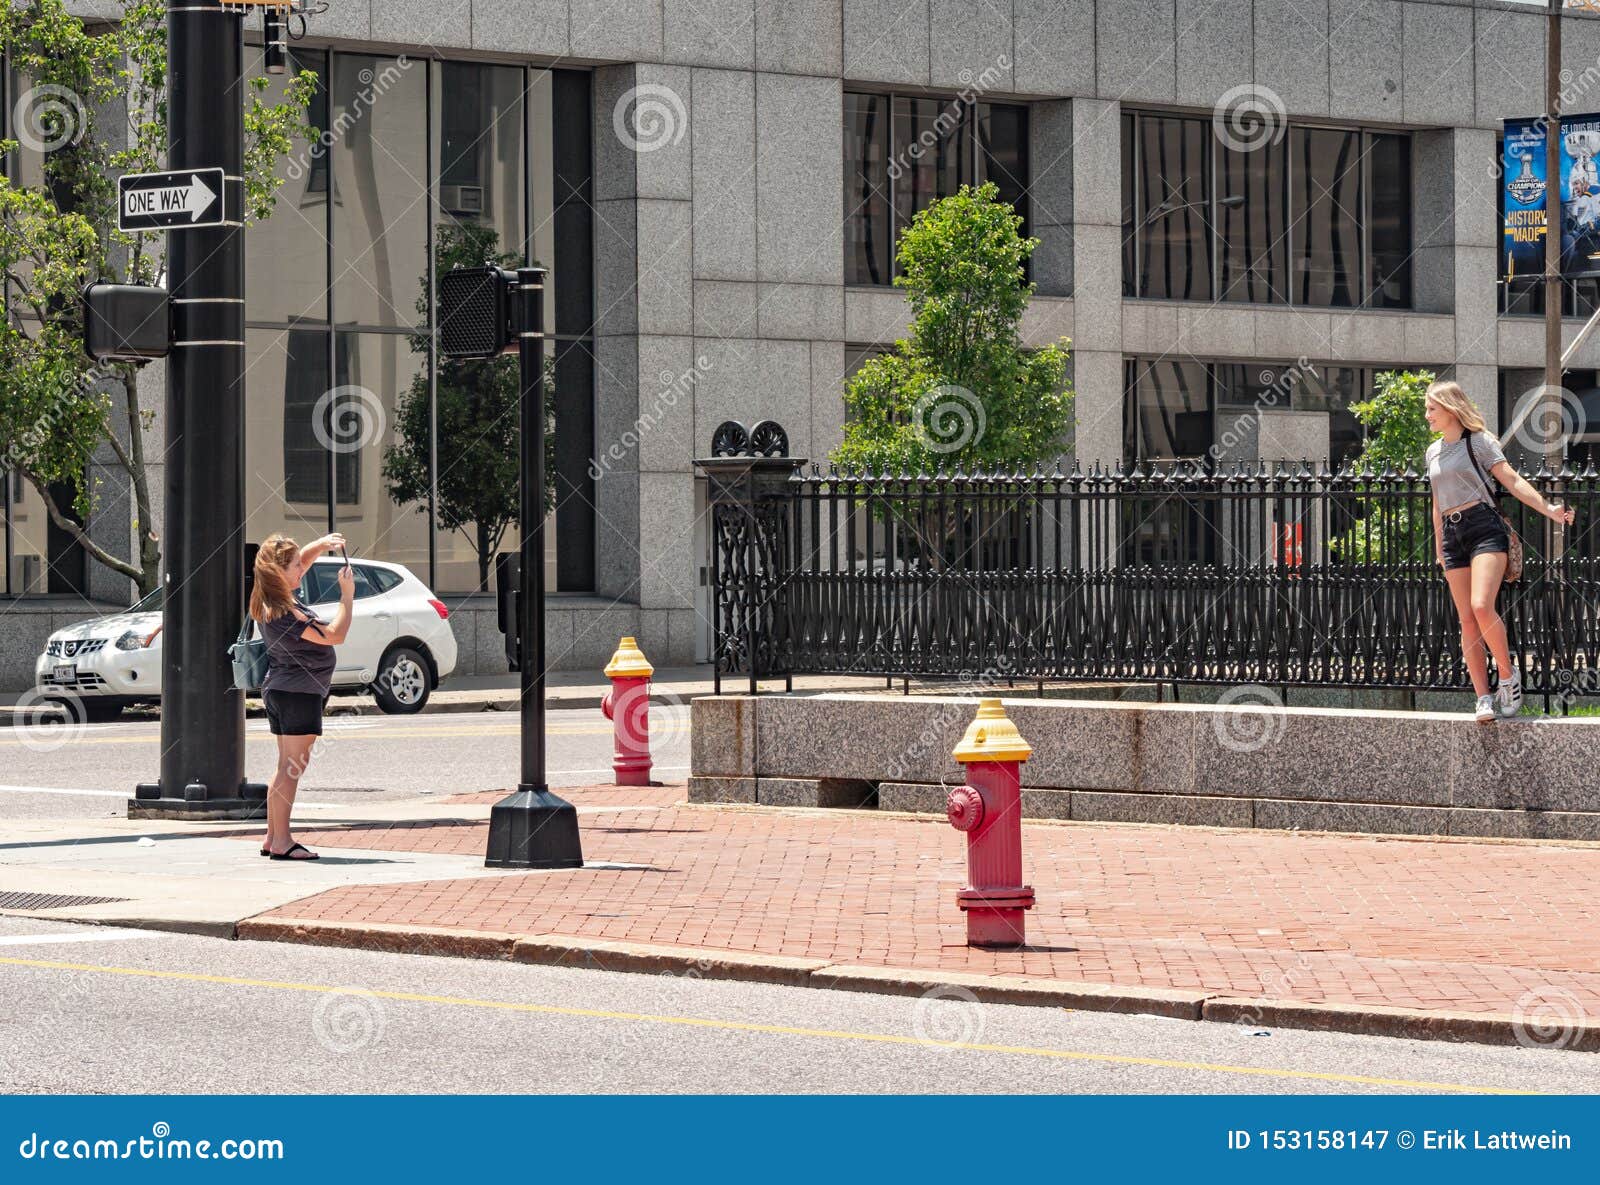 Taking Pictures In The Streets Of St. Louis - SAINT LOUIS. USA - JUNE 19, 2019 Editorial ...